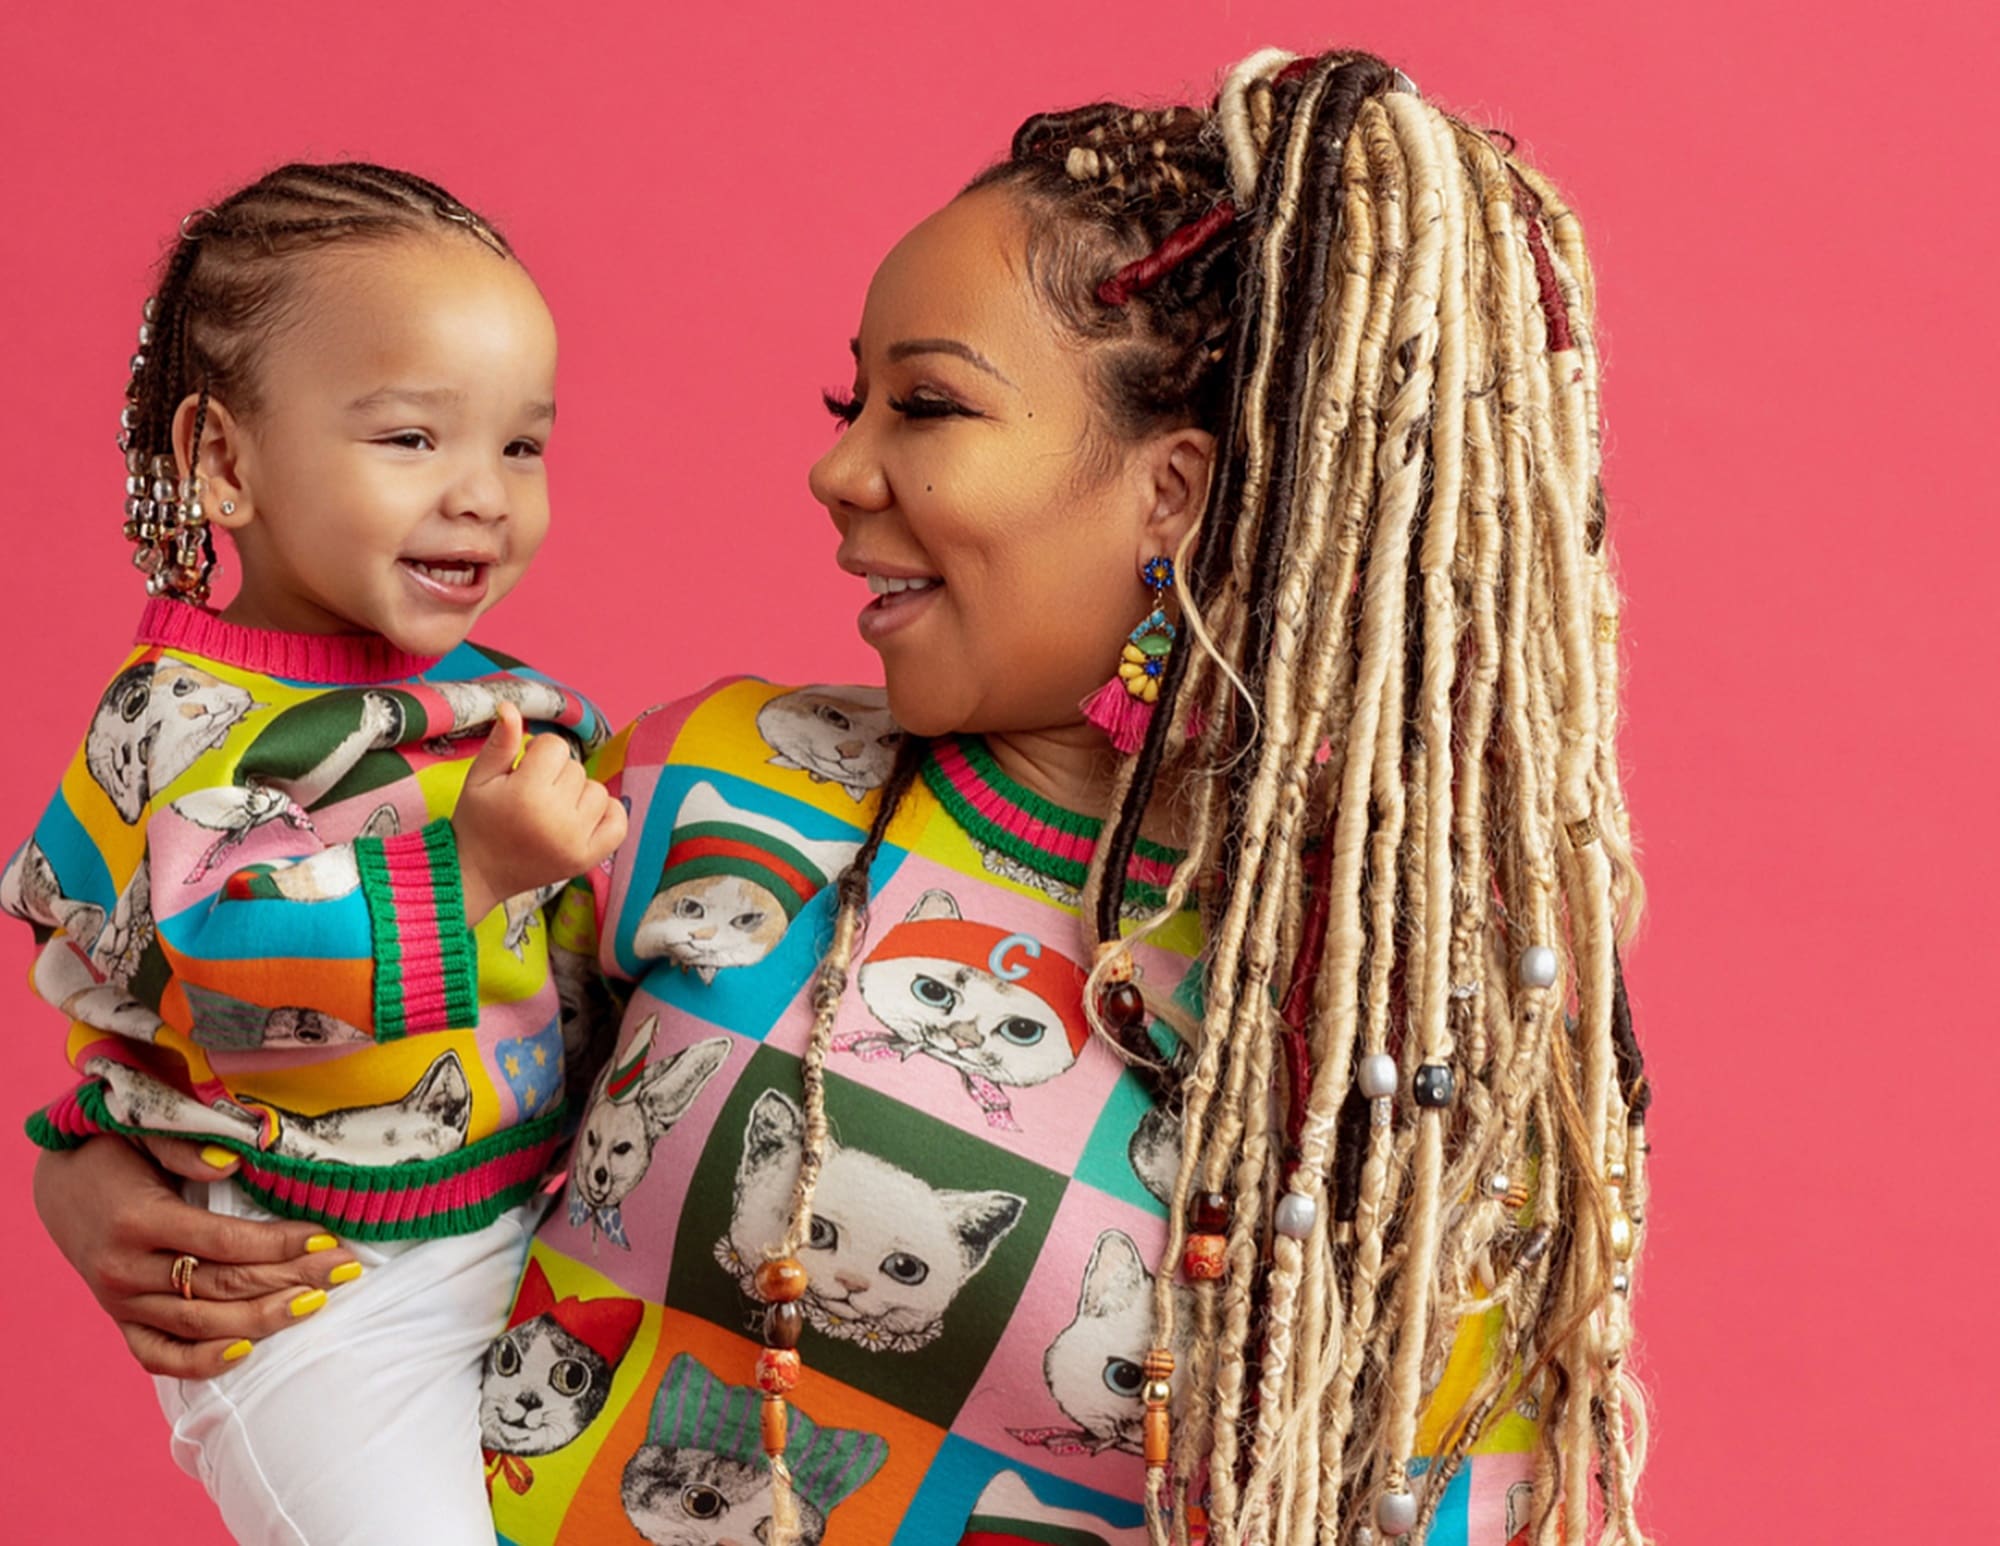 Tiny Harris And Her Daughter Heiress Harris Are ‘Flexin’ For The Gram’ In ...2000 x 1546